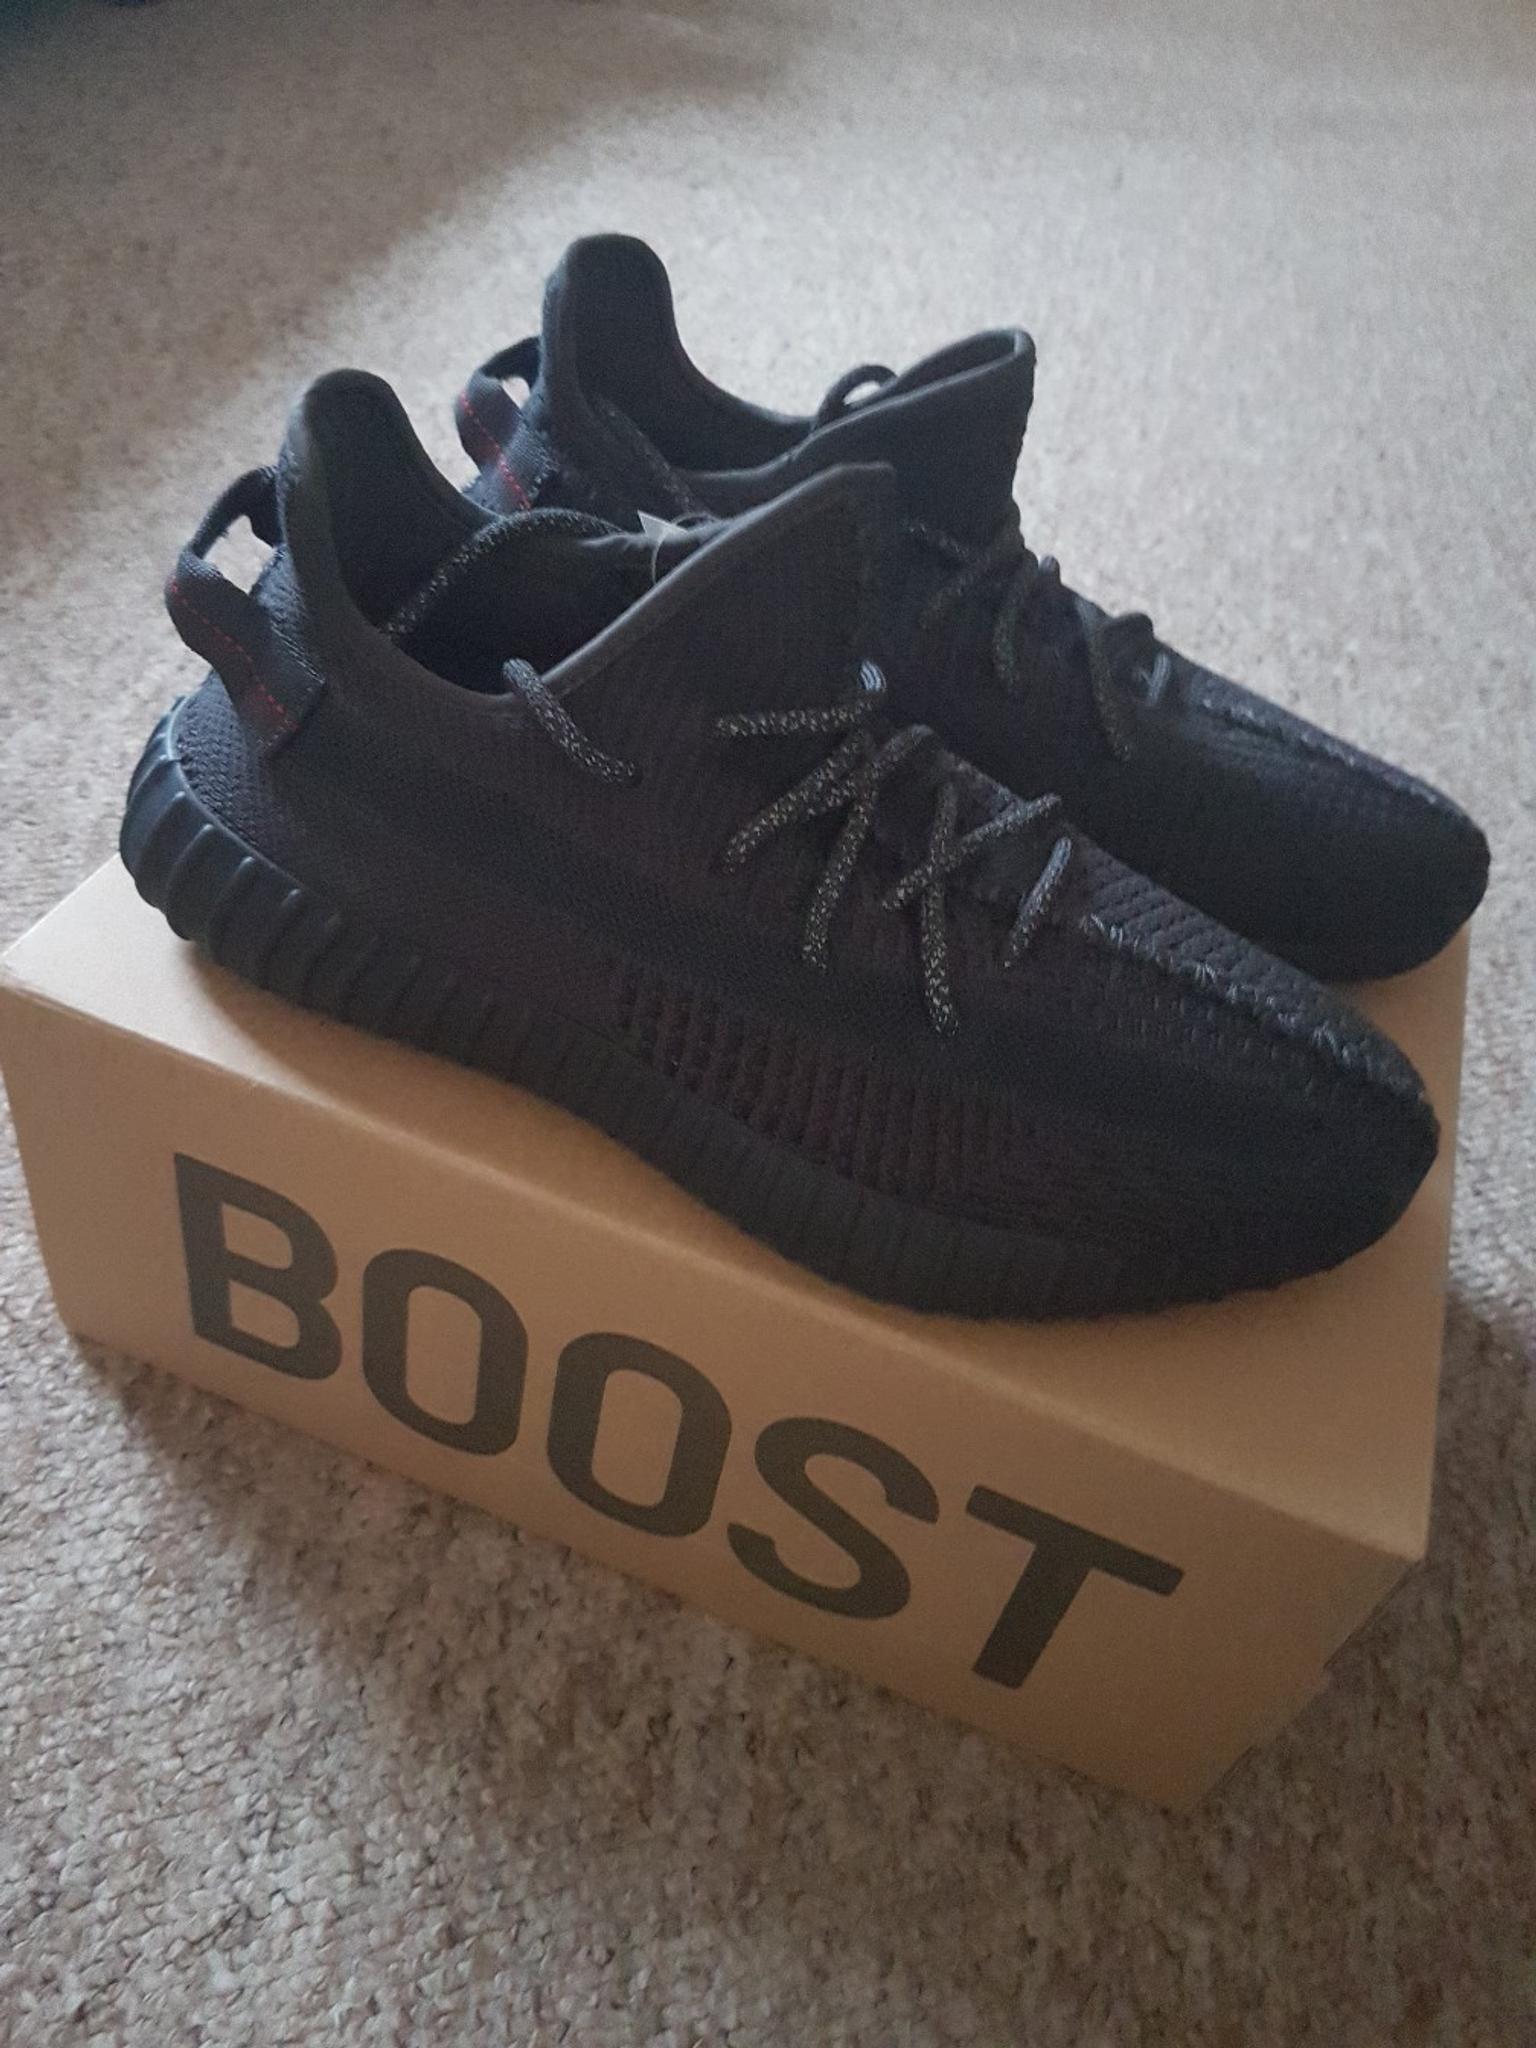 adidas yeezy boost trainers